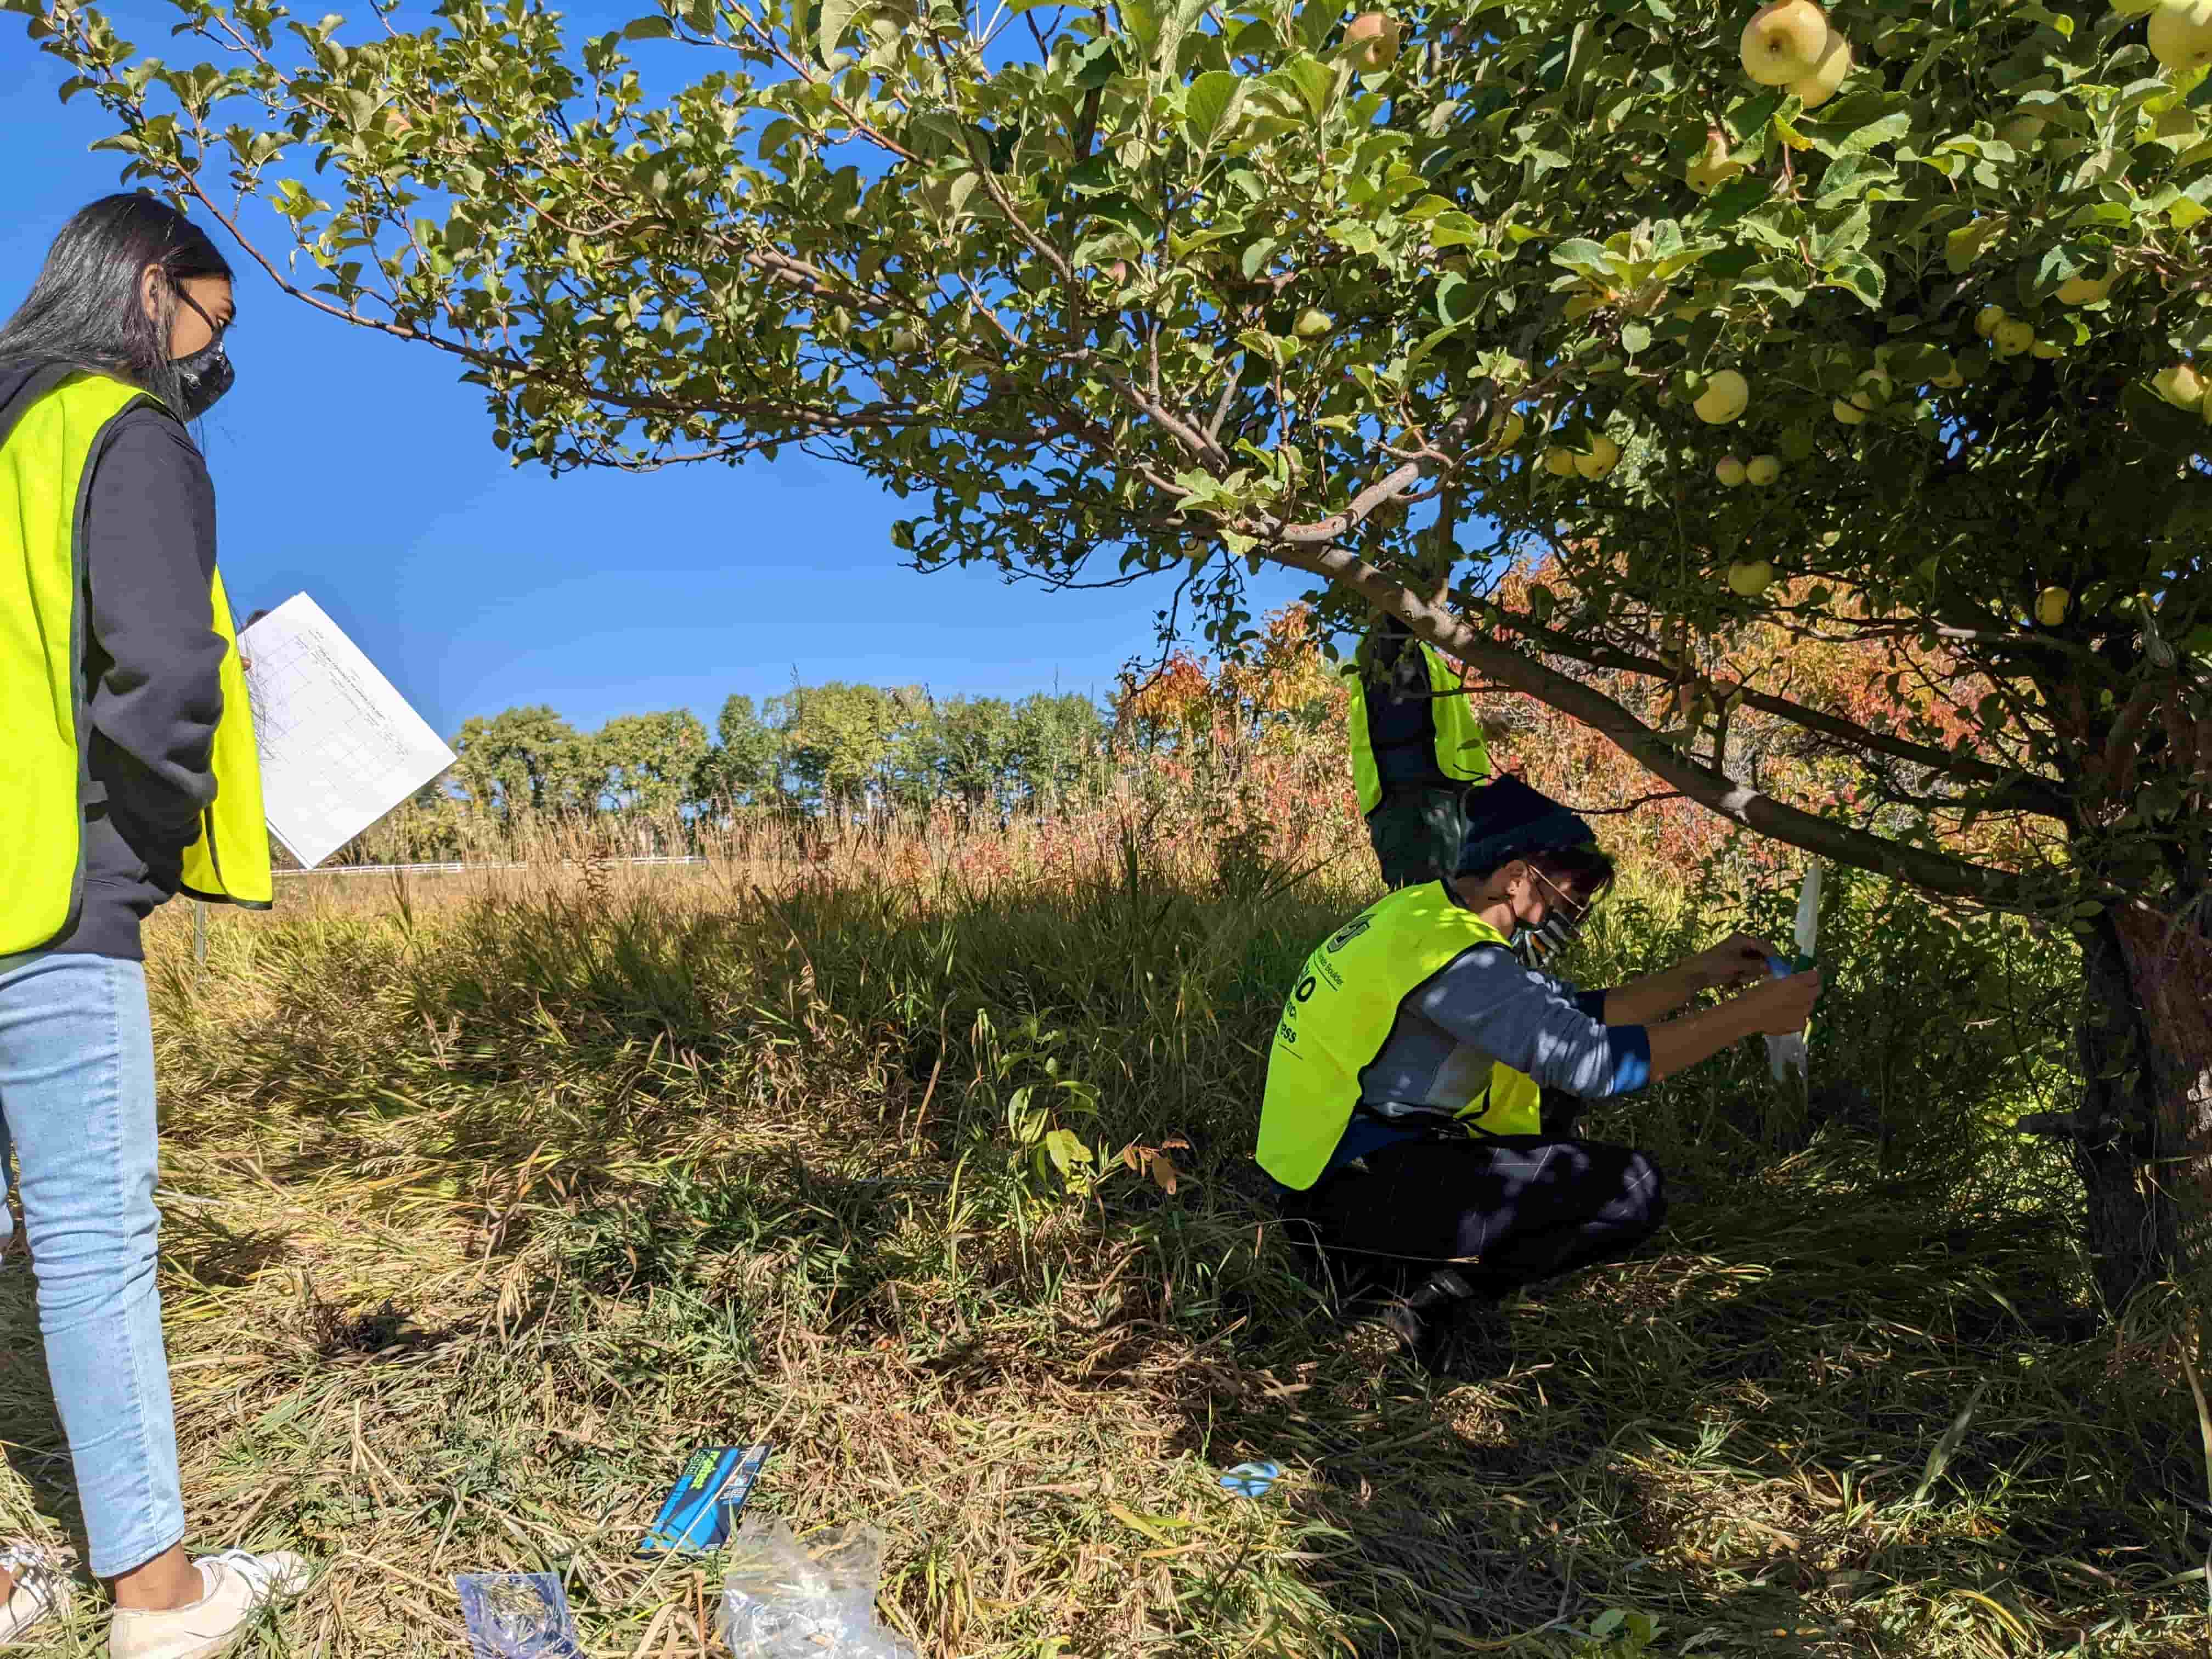 The Power of Place: A Course-Based Undergraduate Research Experience Studying Urban Ecology, Local Apple Trees and Disease Susceptibility